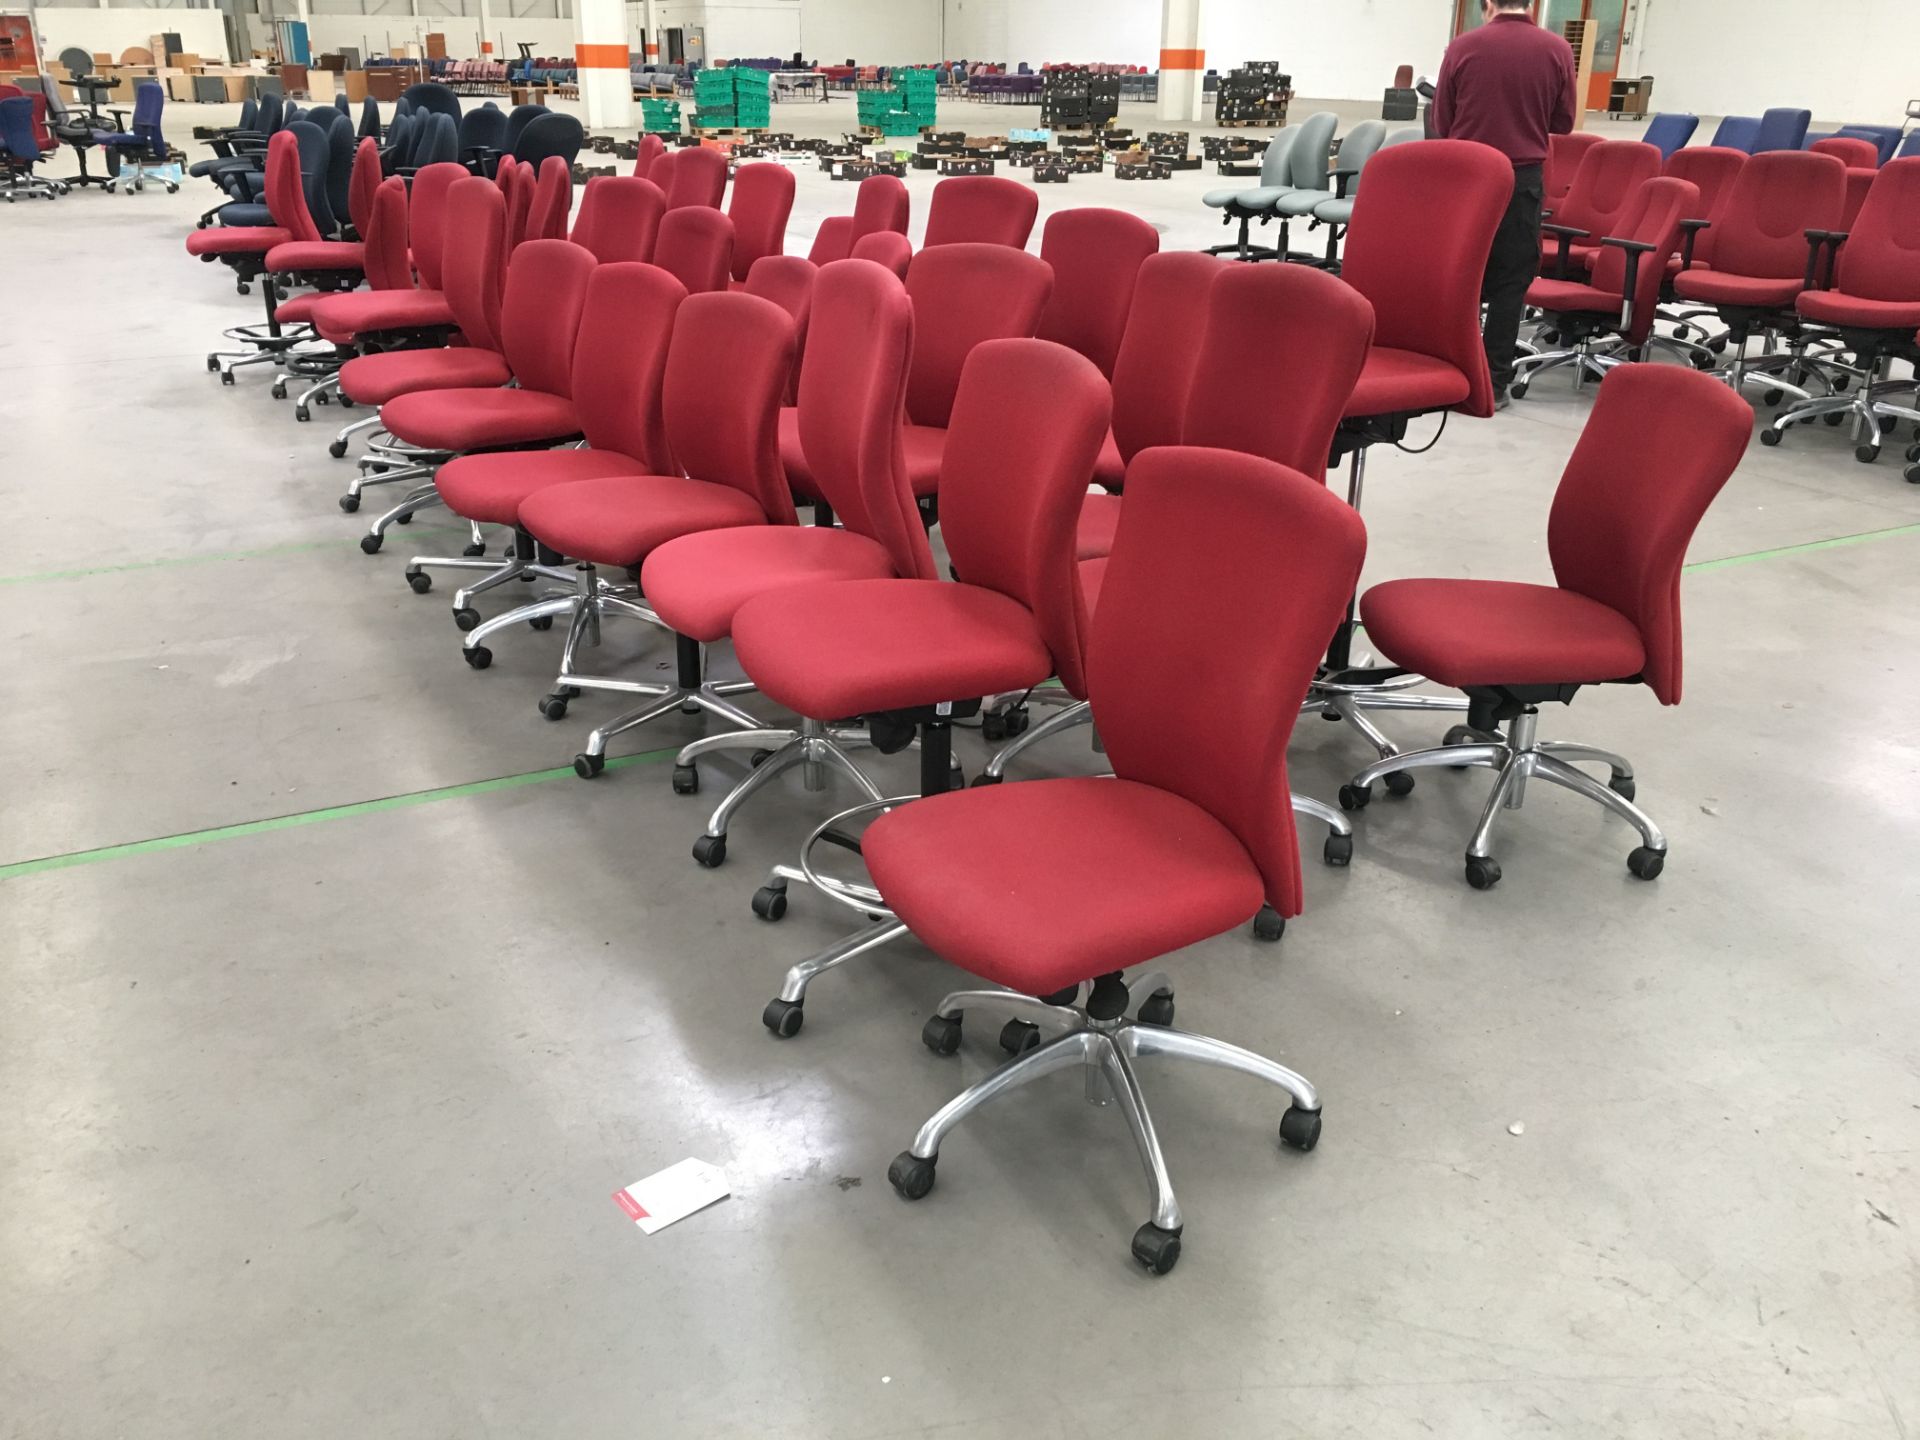 34 x Boss height adjustable typist chairs